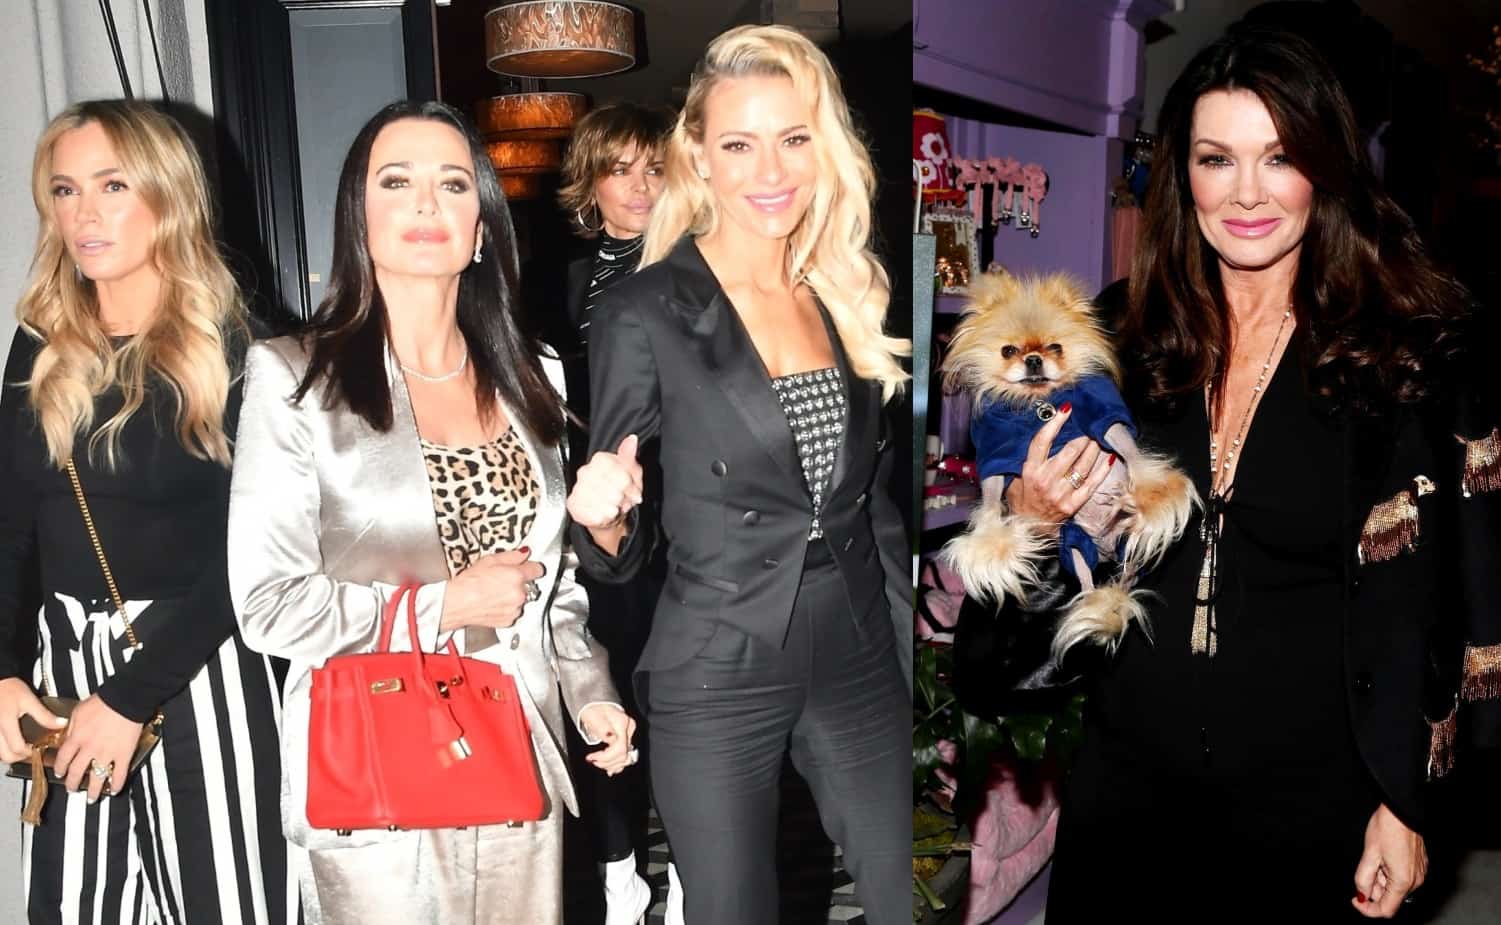 RHOBH Cast 'Extremely UnHappy' Over News of Lisa Vanderpump's New Spinoff for Vanderpump Dogs